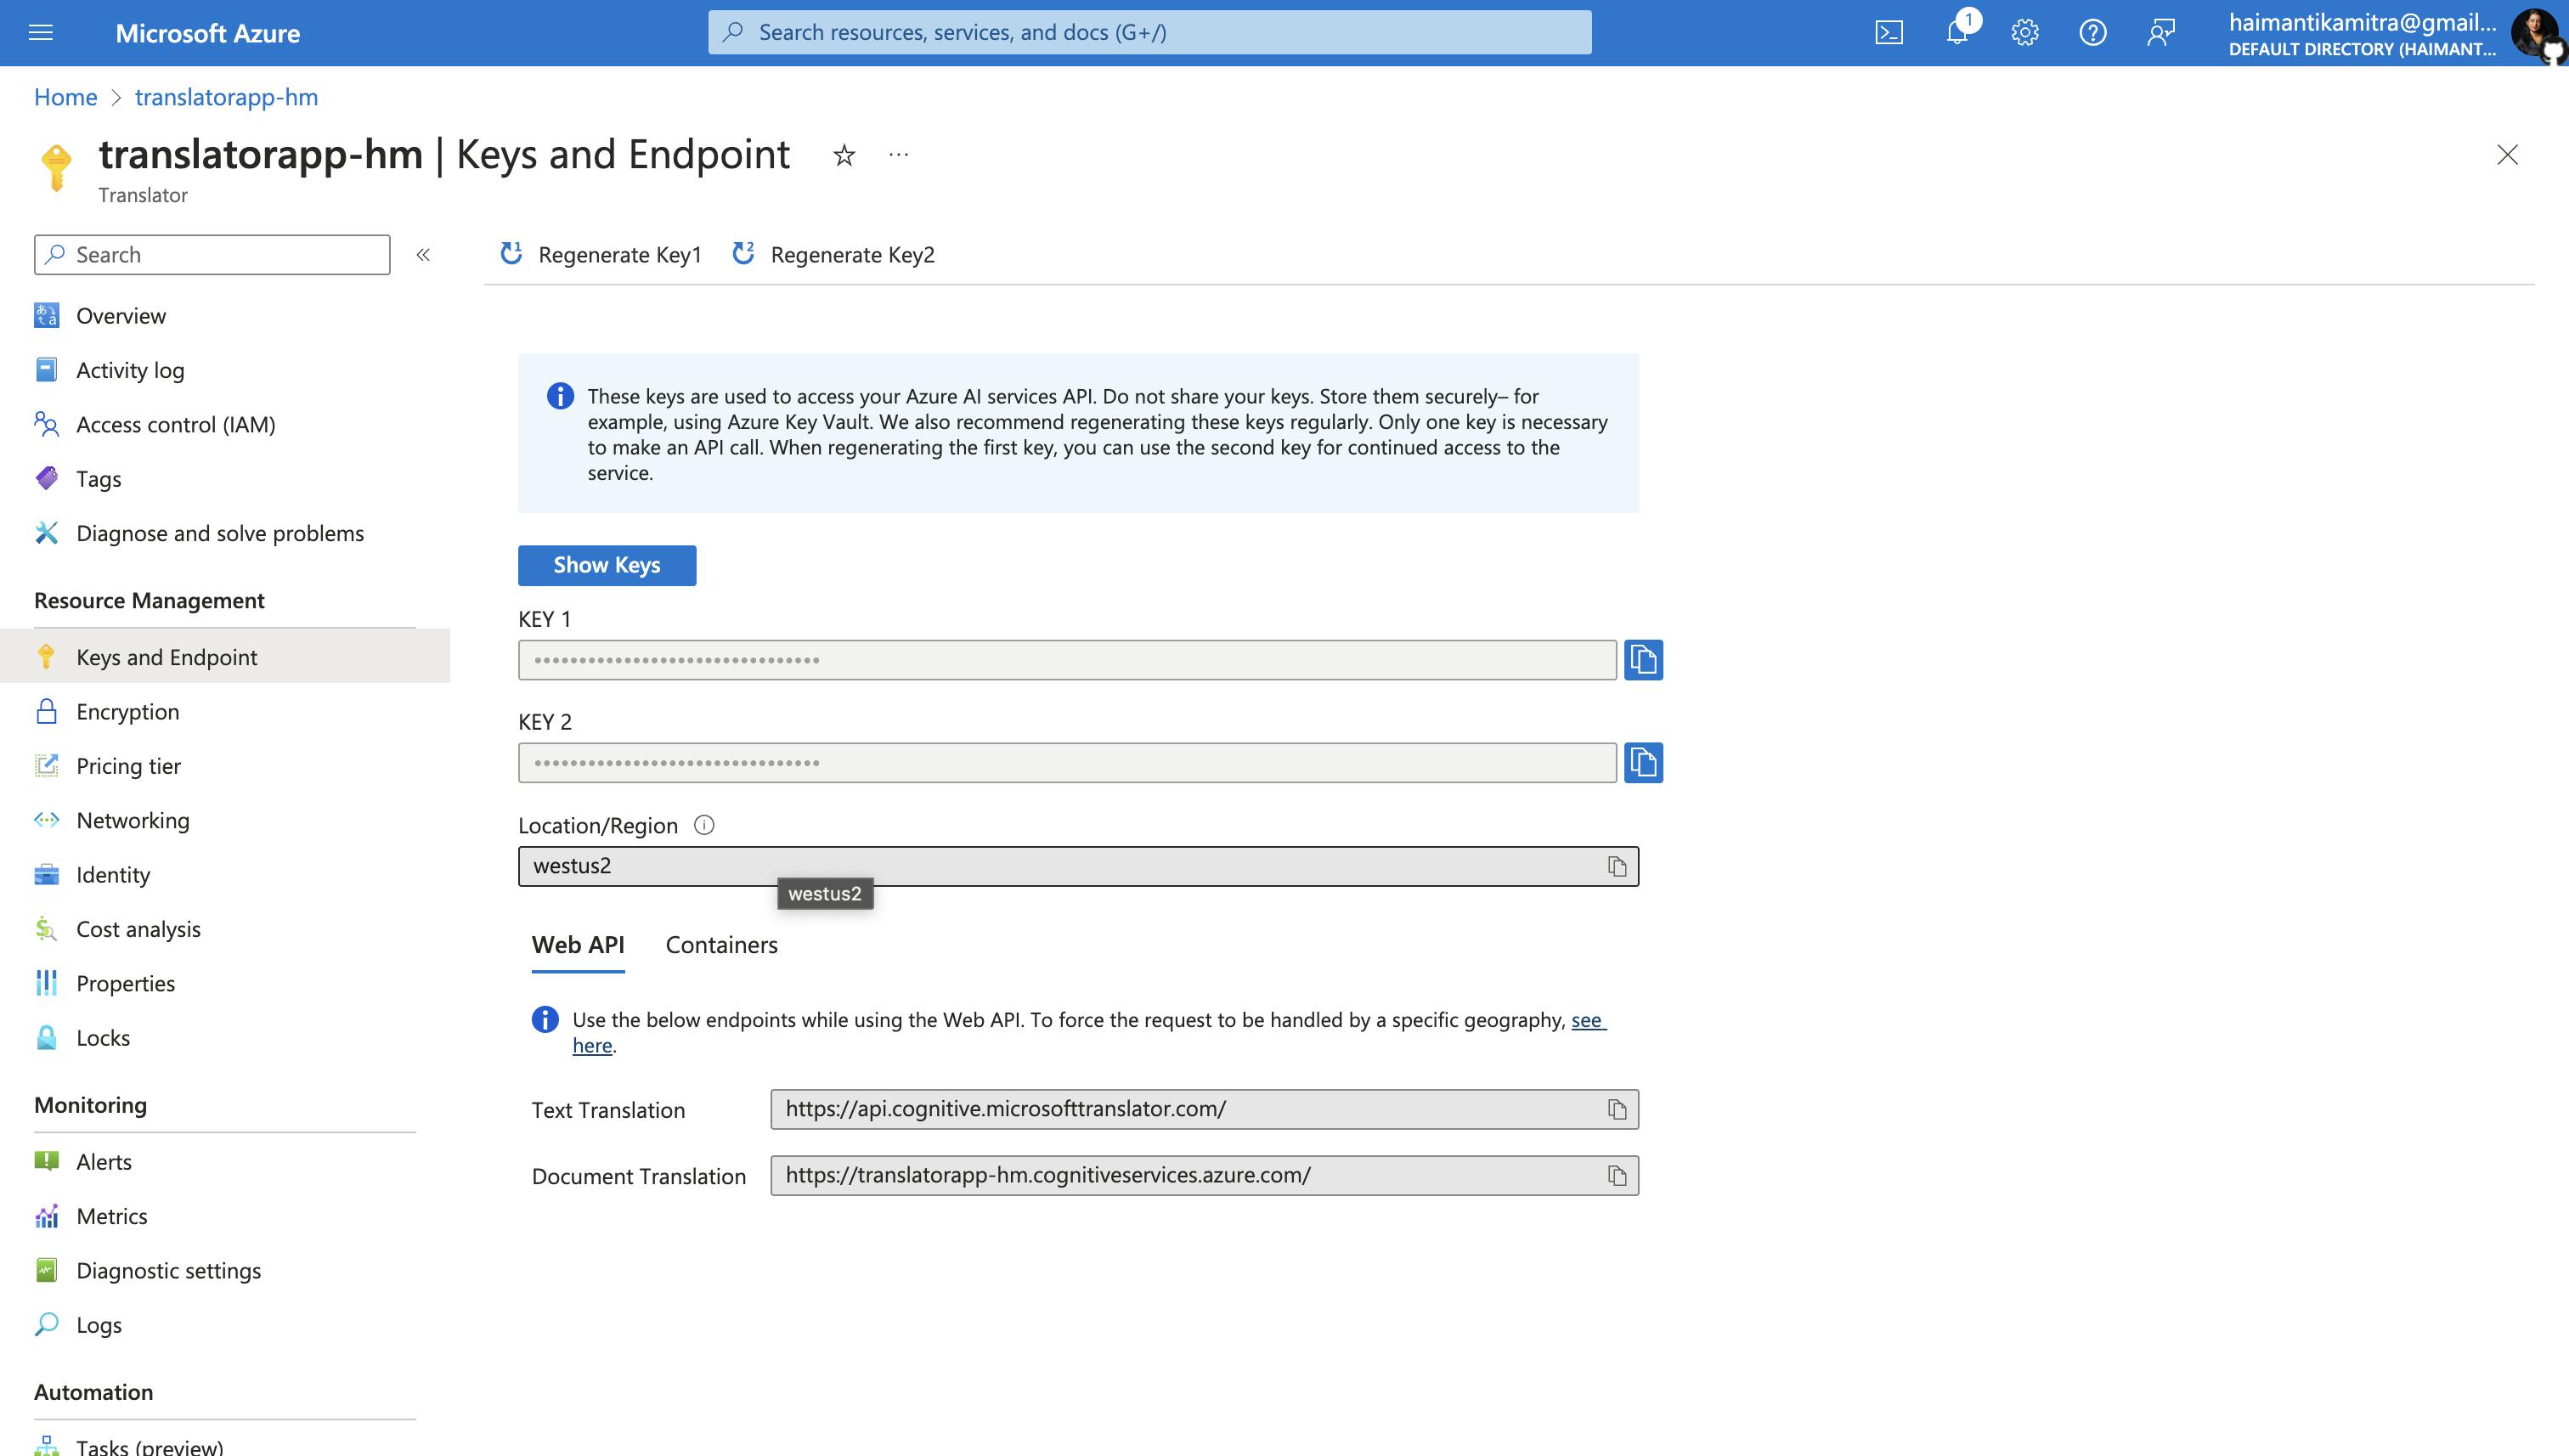 Screenshot of Microsoft Azure's management interface showing the "Keys and Endpoint" section of a Translator service, with options to view and regenerate API keys, and details of the service's location and endpoints.